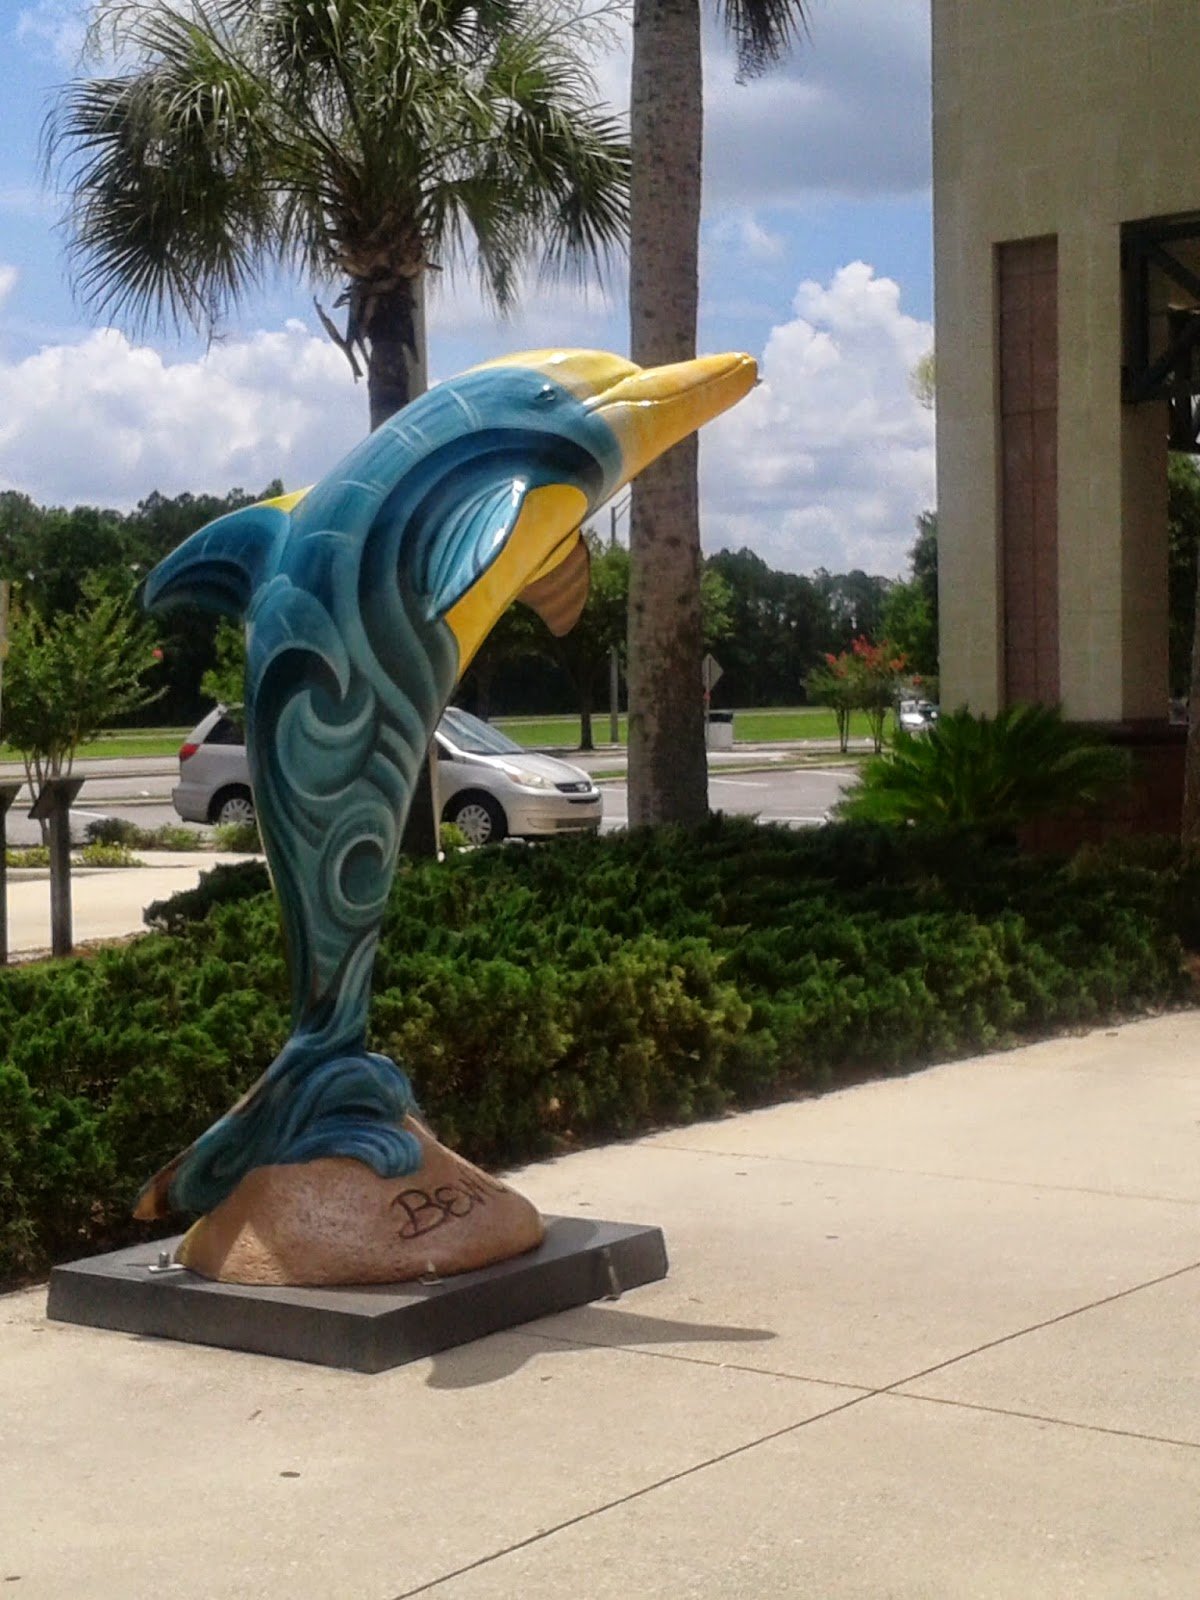 Dolphins &Whales Forever dolphin statute